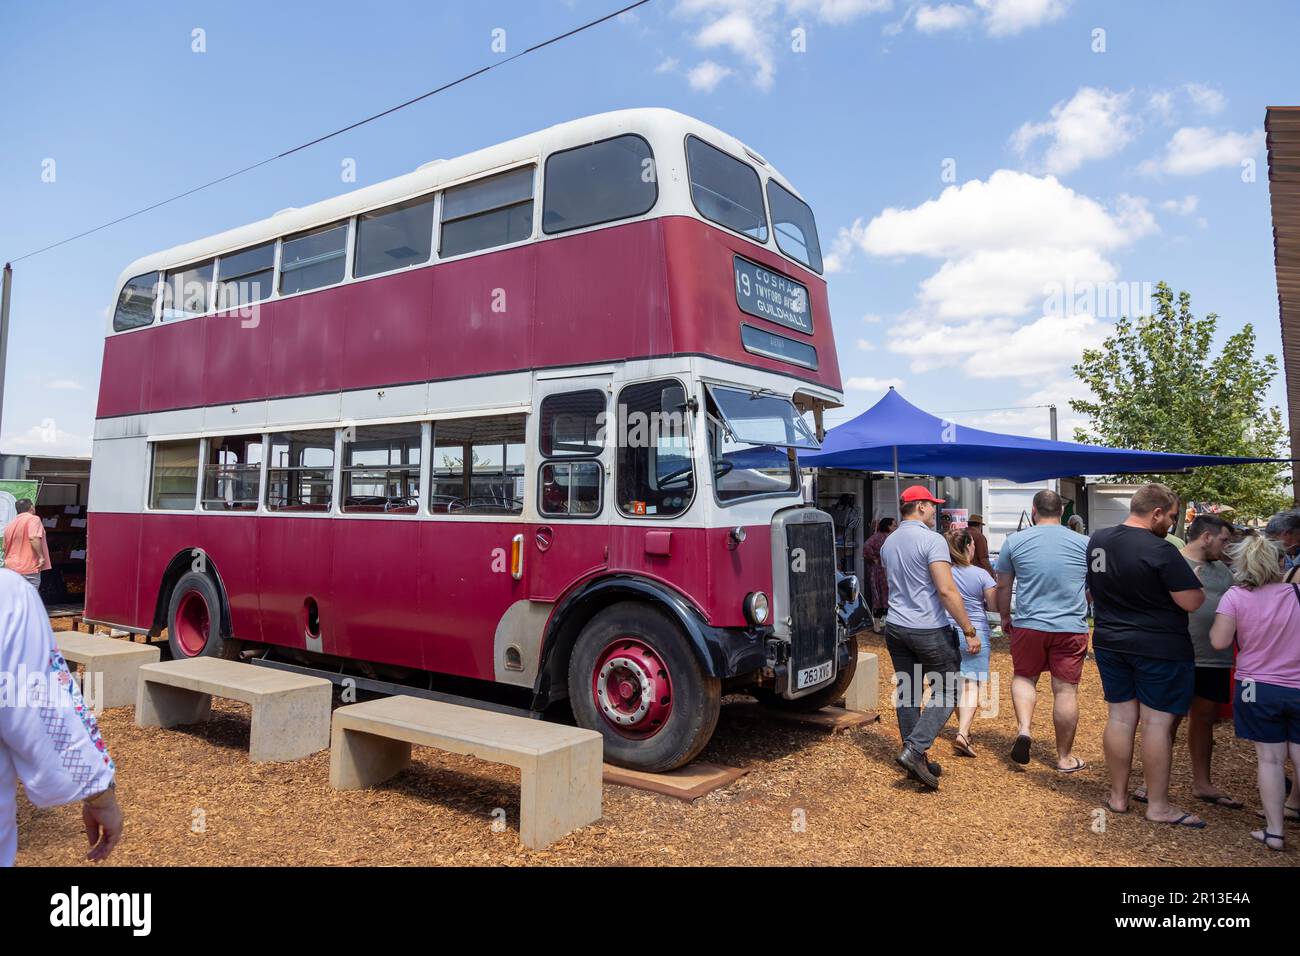 Pretoria, South Africa - March 12th 2023:Old double decker bus on display at outdoor trading market. Stock Photo